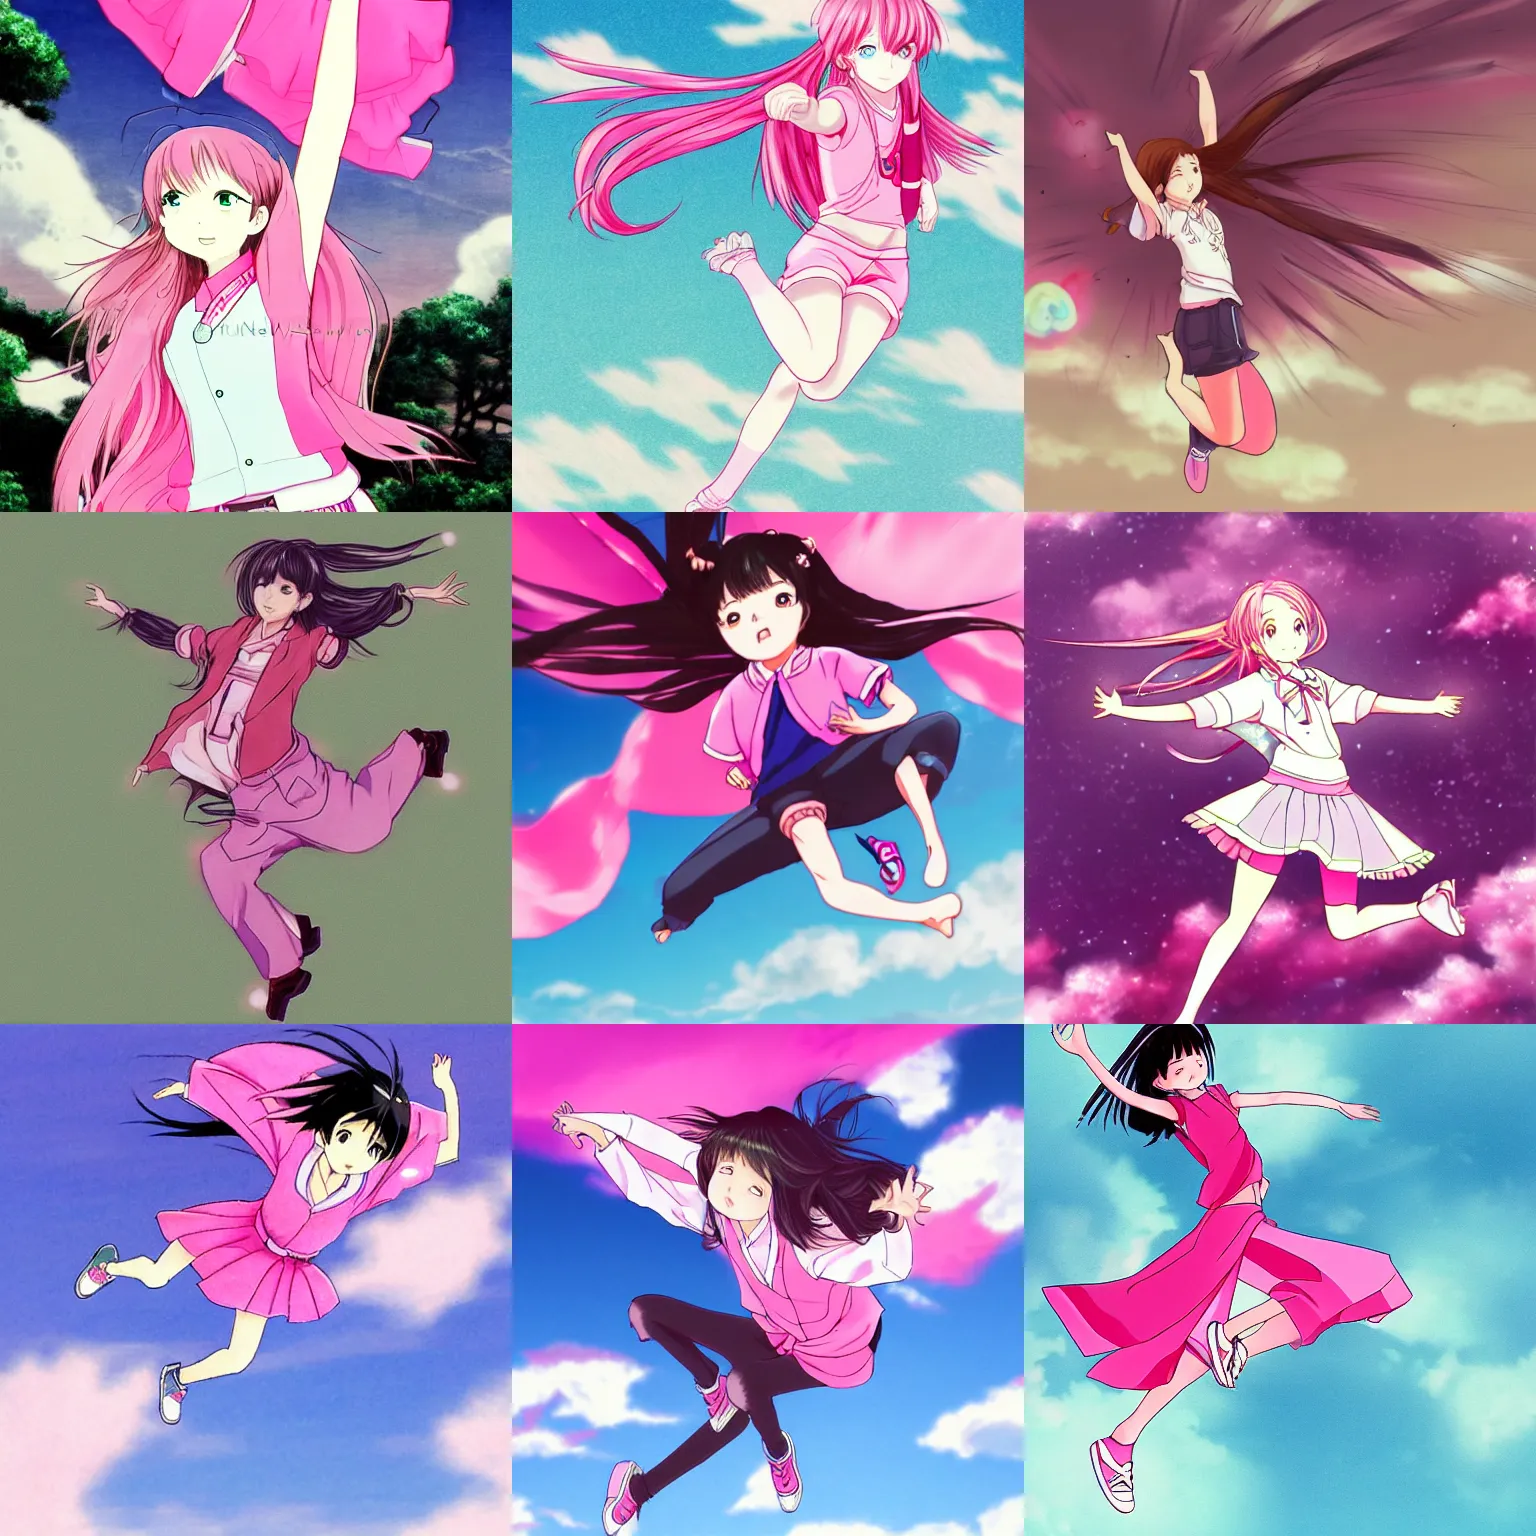 Prompt: a girl flying through the air while wearing a pink shirt, an anime drawing by Toyohara Kunichika, featured on pixiv, neo-romanticism, official art, anime aesthetic, deviantart hd